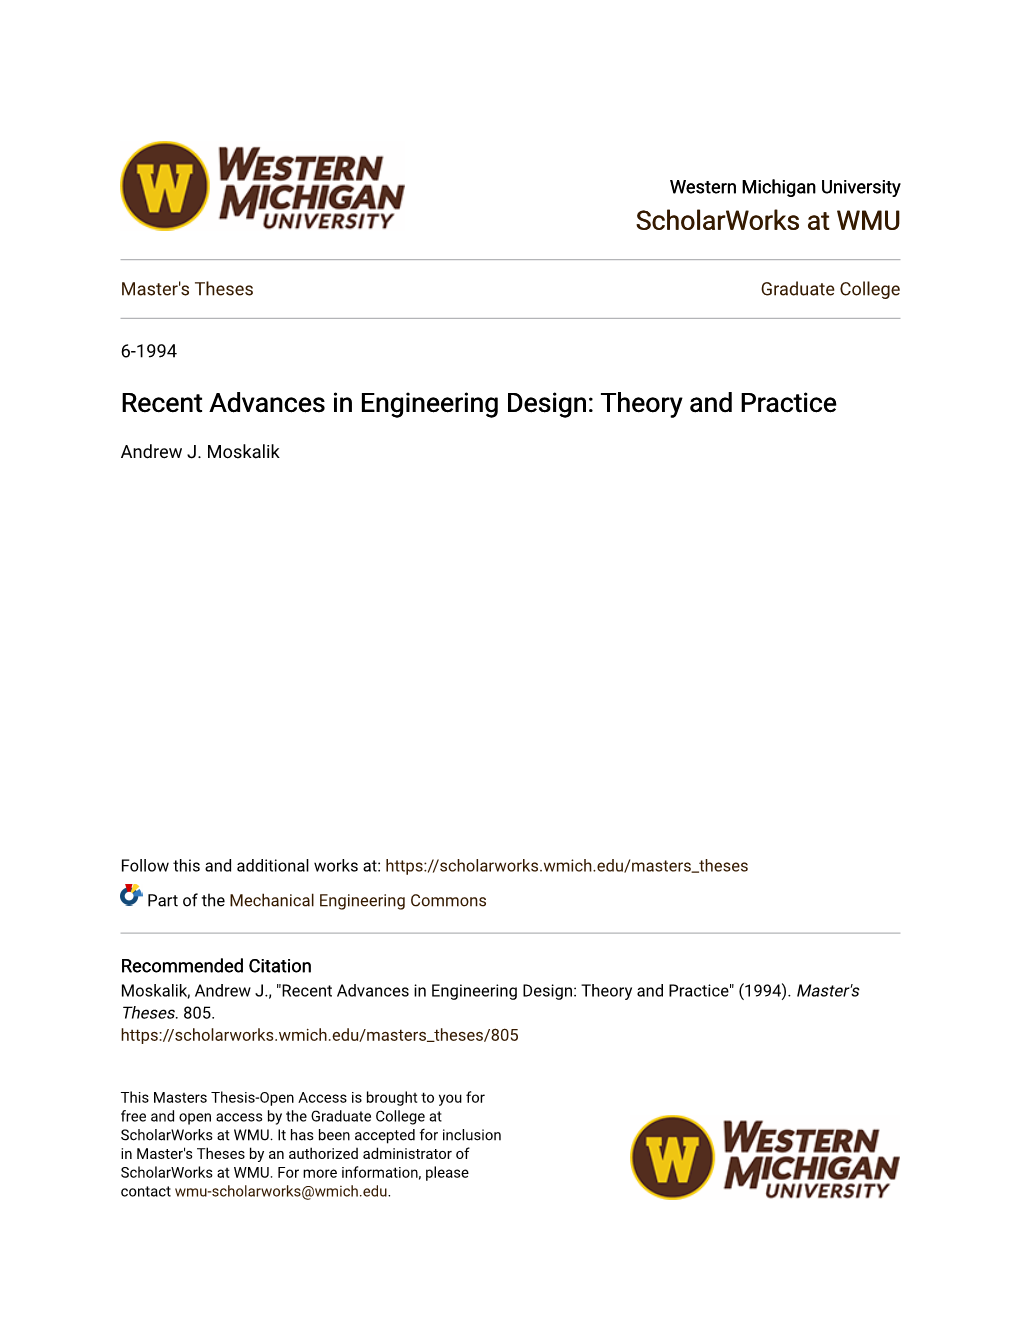 Recent Advances in Engineering Design: Theory and Practice